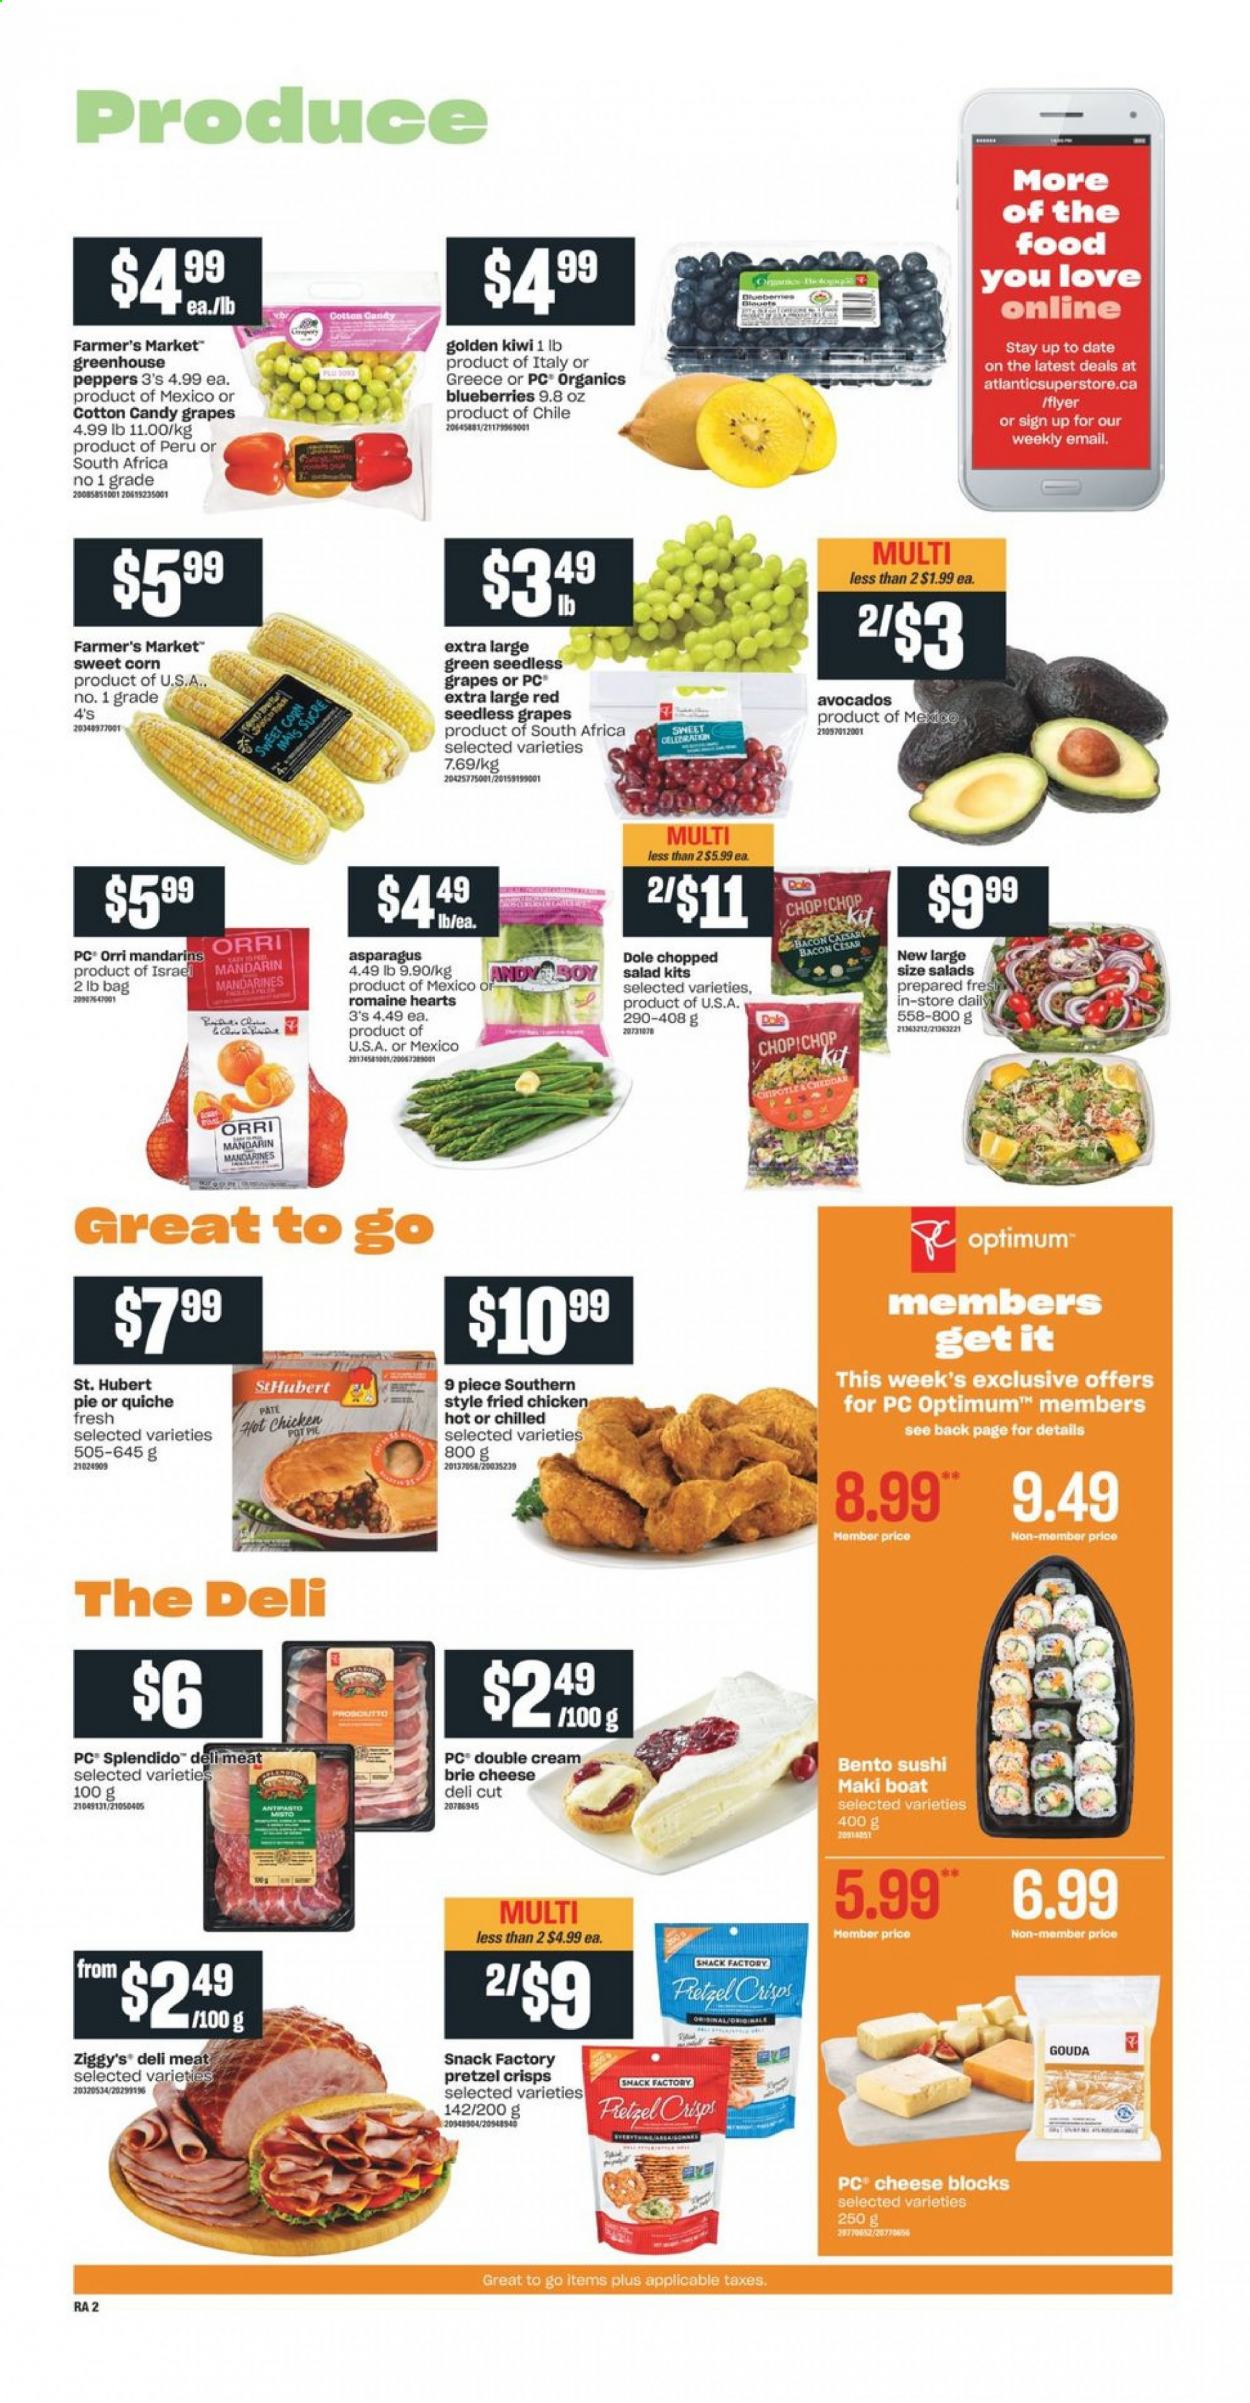 thumbnail - Atlantic Superstore Flyer - February 18, 2021 - February 24, 2021 - Sales products - pie, pot pie, asparagus, corn, salad, Dole, peppers, sweet corn, chopped salad, avocado, blueberries, grapes, mandarines, seedless grapes, fried chicken, bacon, gouda, cheddar, cheese, brie, quiche, snack, cotton candy, pretzel crisps, bag, Optimum, pot, kiwi. Page 3.